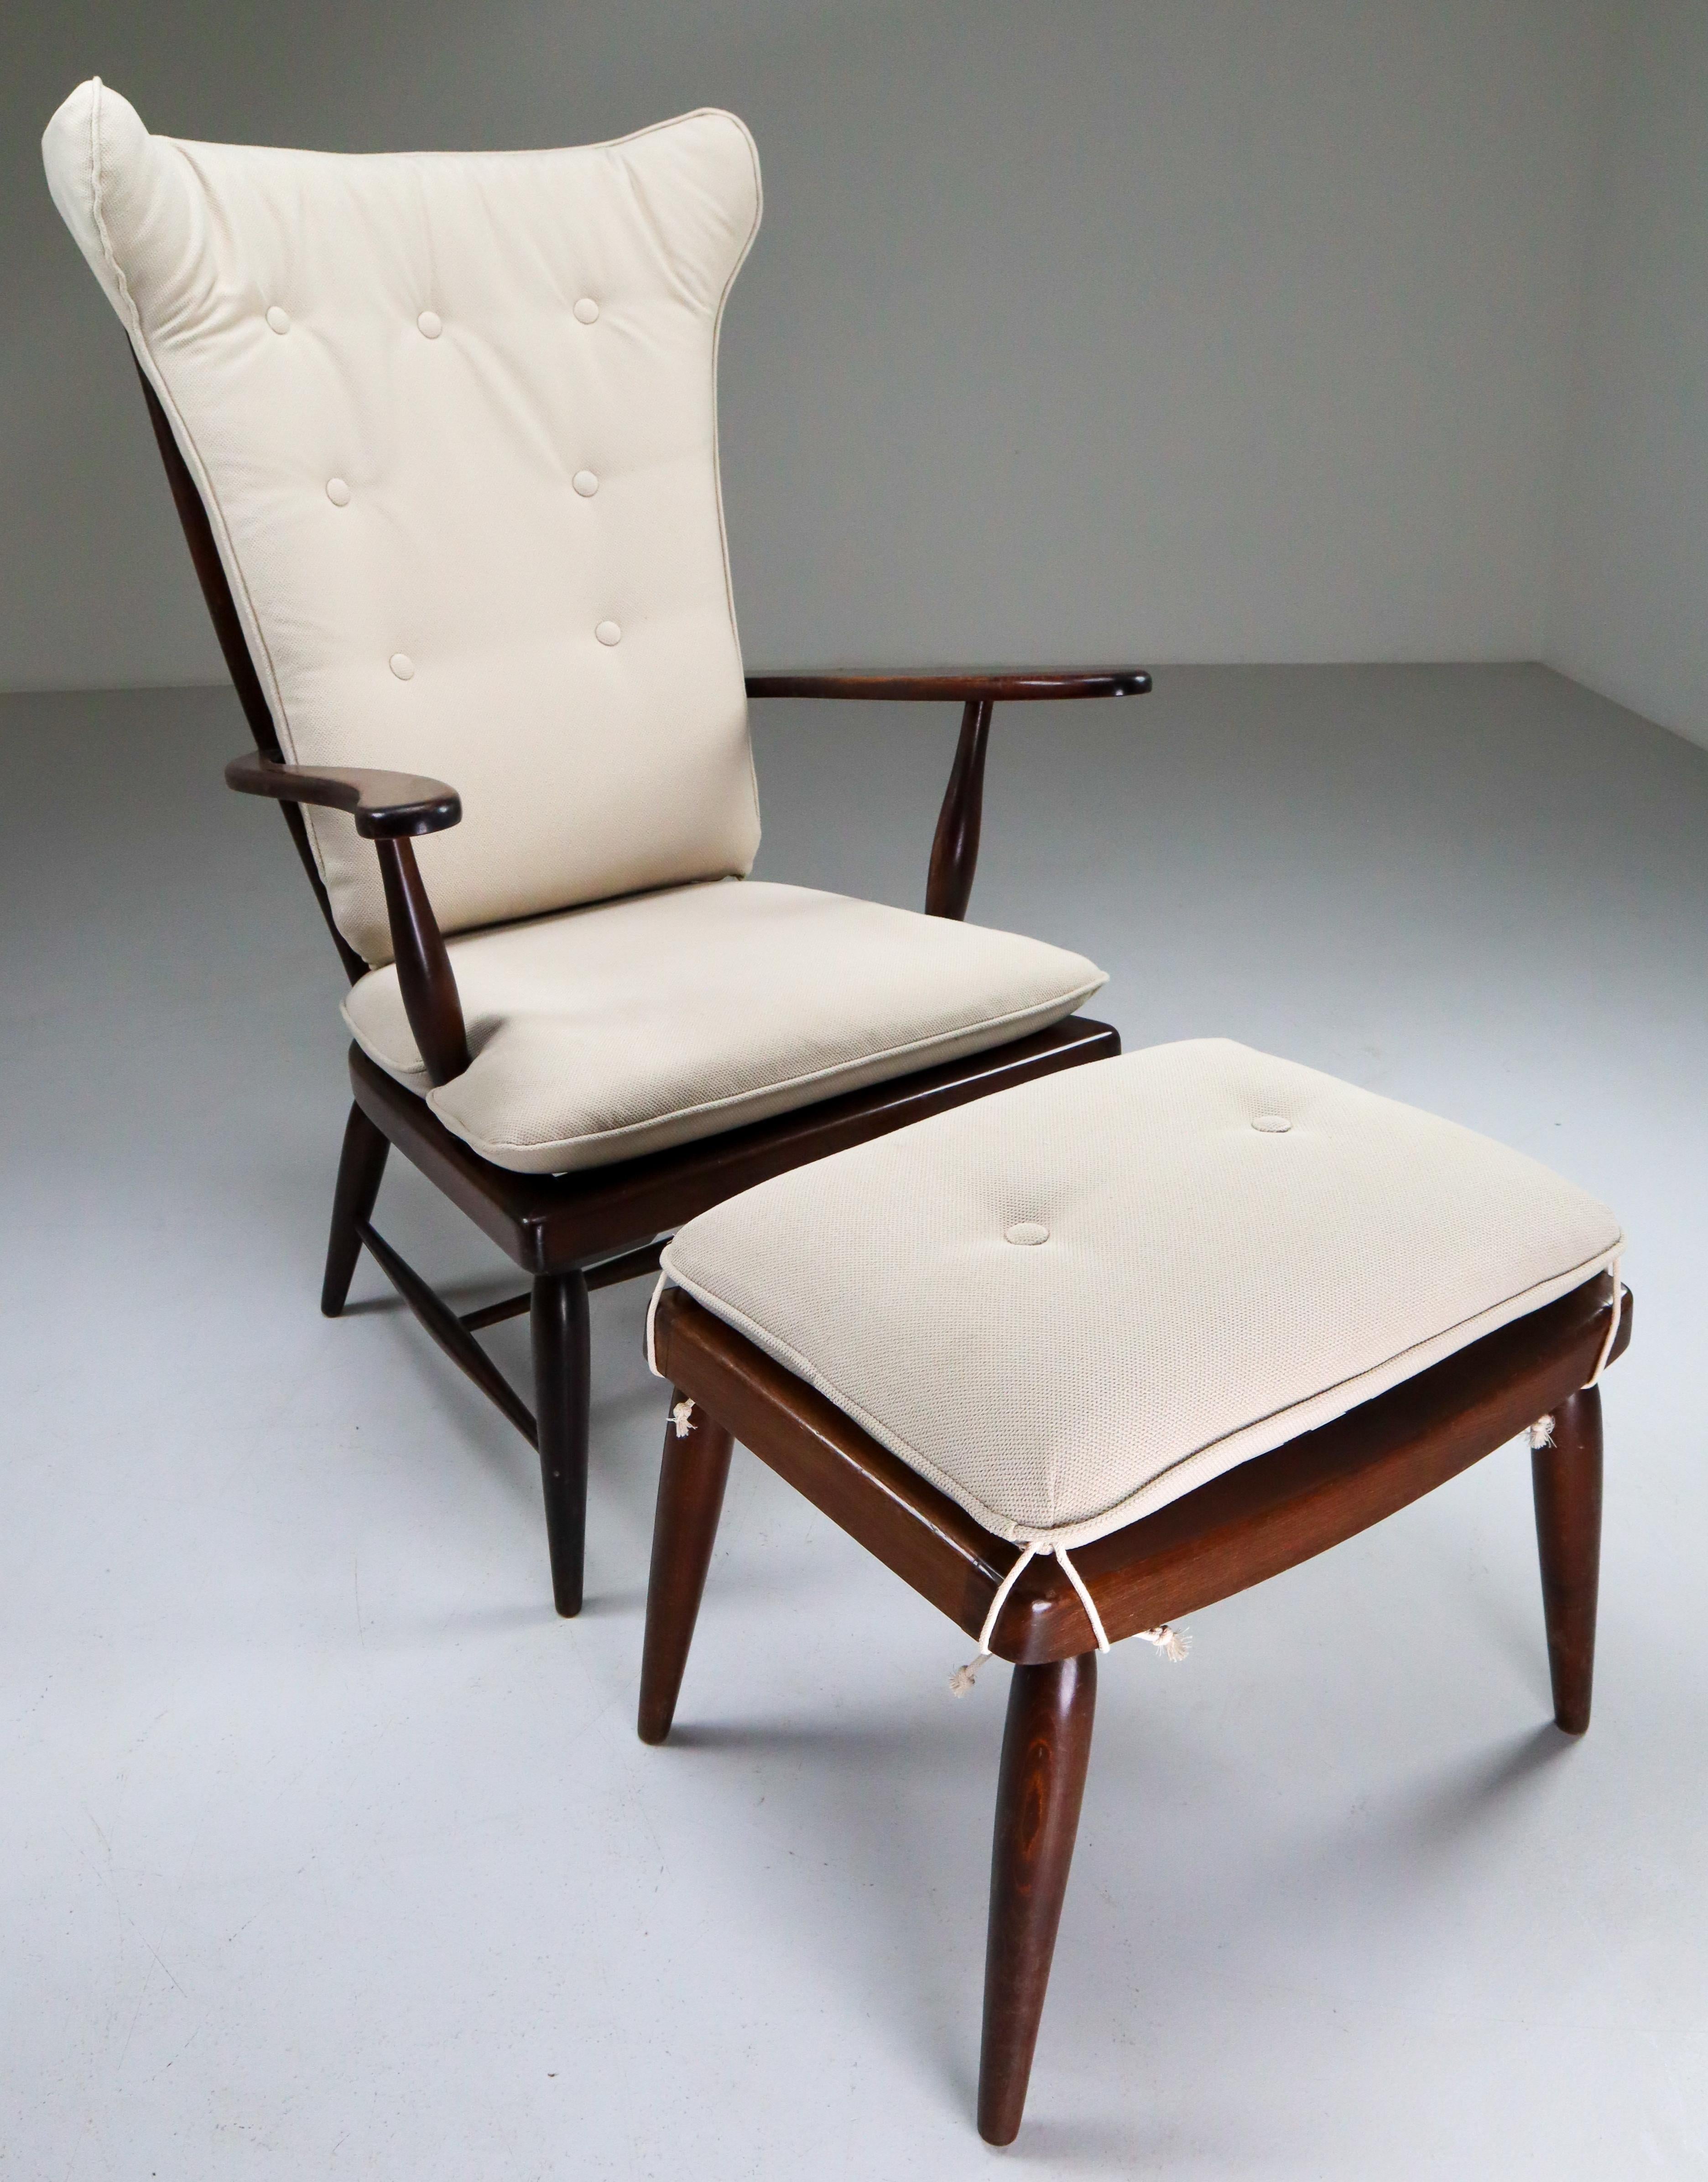 Beautiful pair of walnut high-back armchair and ottoman designed by Anna-Lülja Praun in 1950s. These armchair and ottoman has a solid walnut wood frame with reupholstered high quality cushions. These chair and ottoman is in a very good original